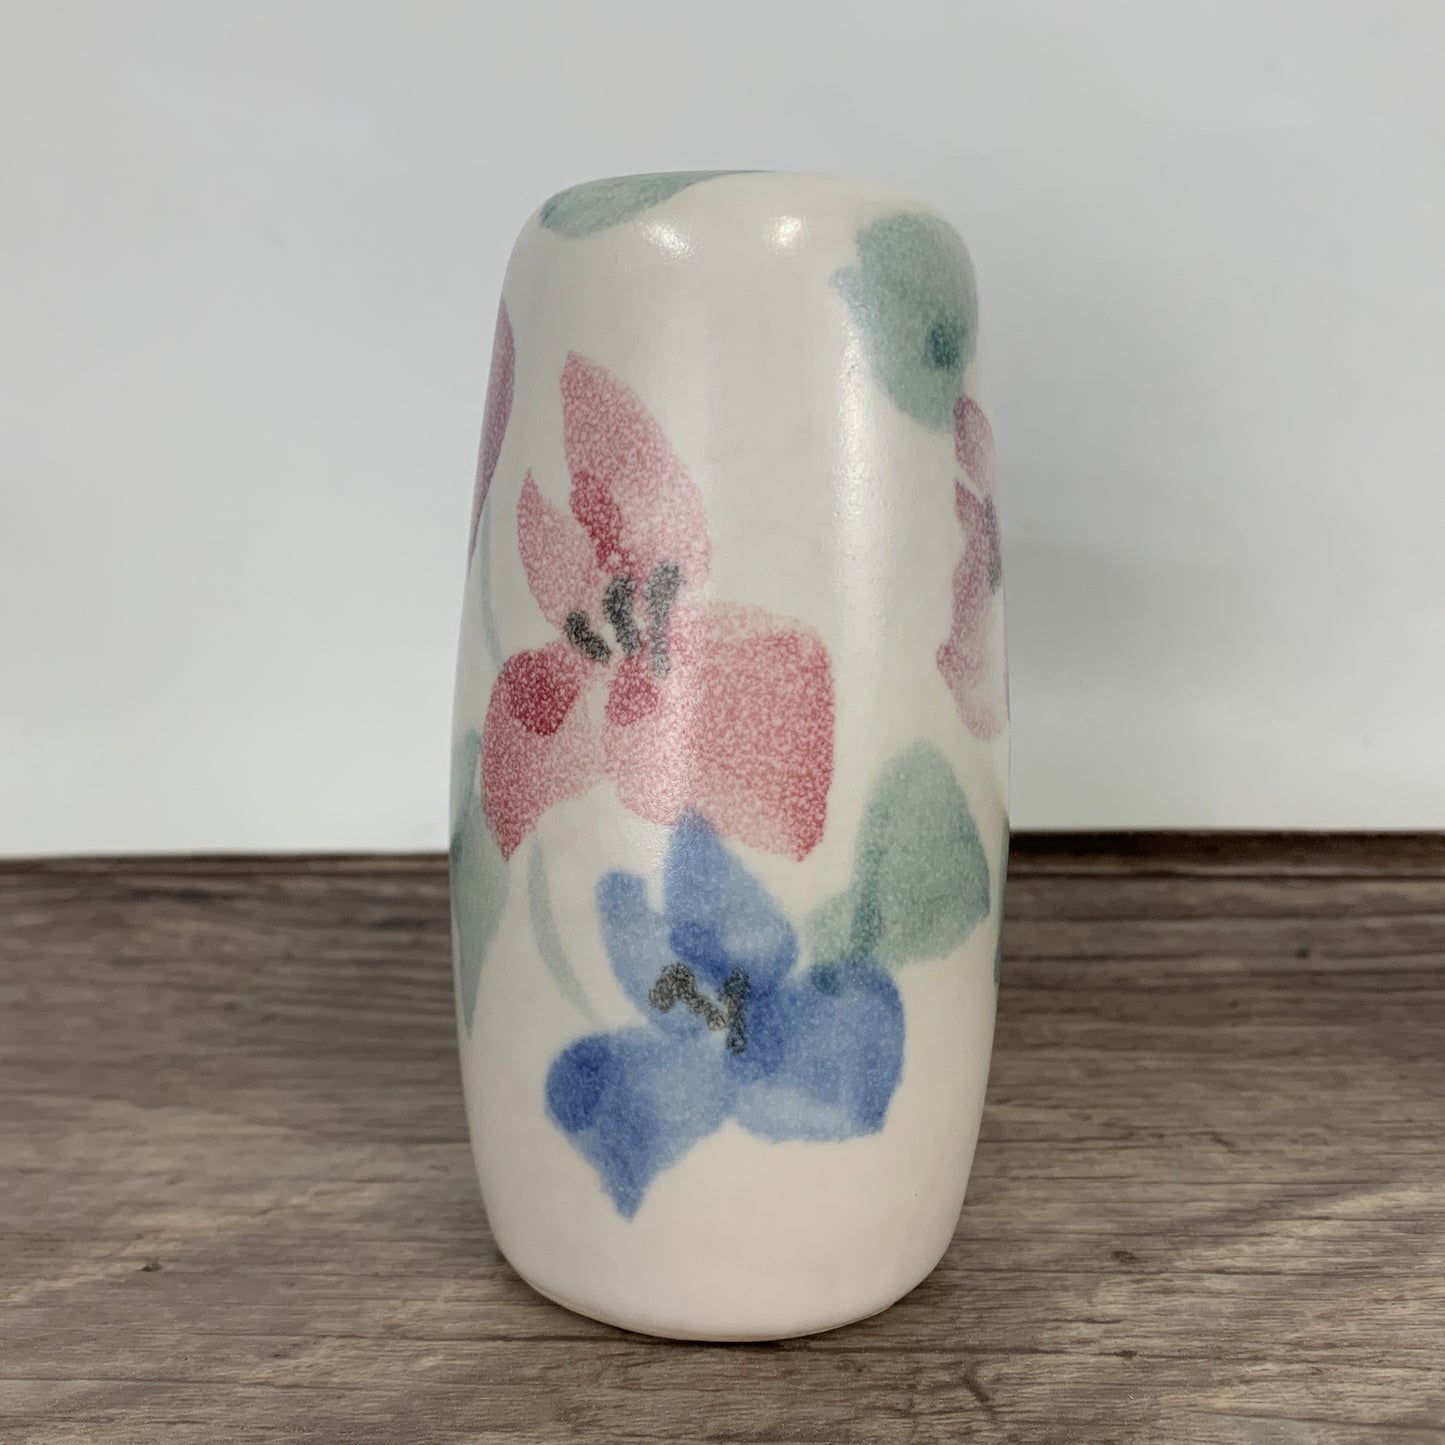 Large Ceramic Salt and Pepper with Pink and Blue Flowers, Tall Vintage Salt and Pepper Shakers